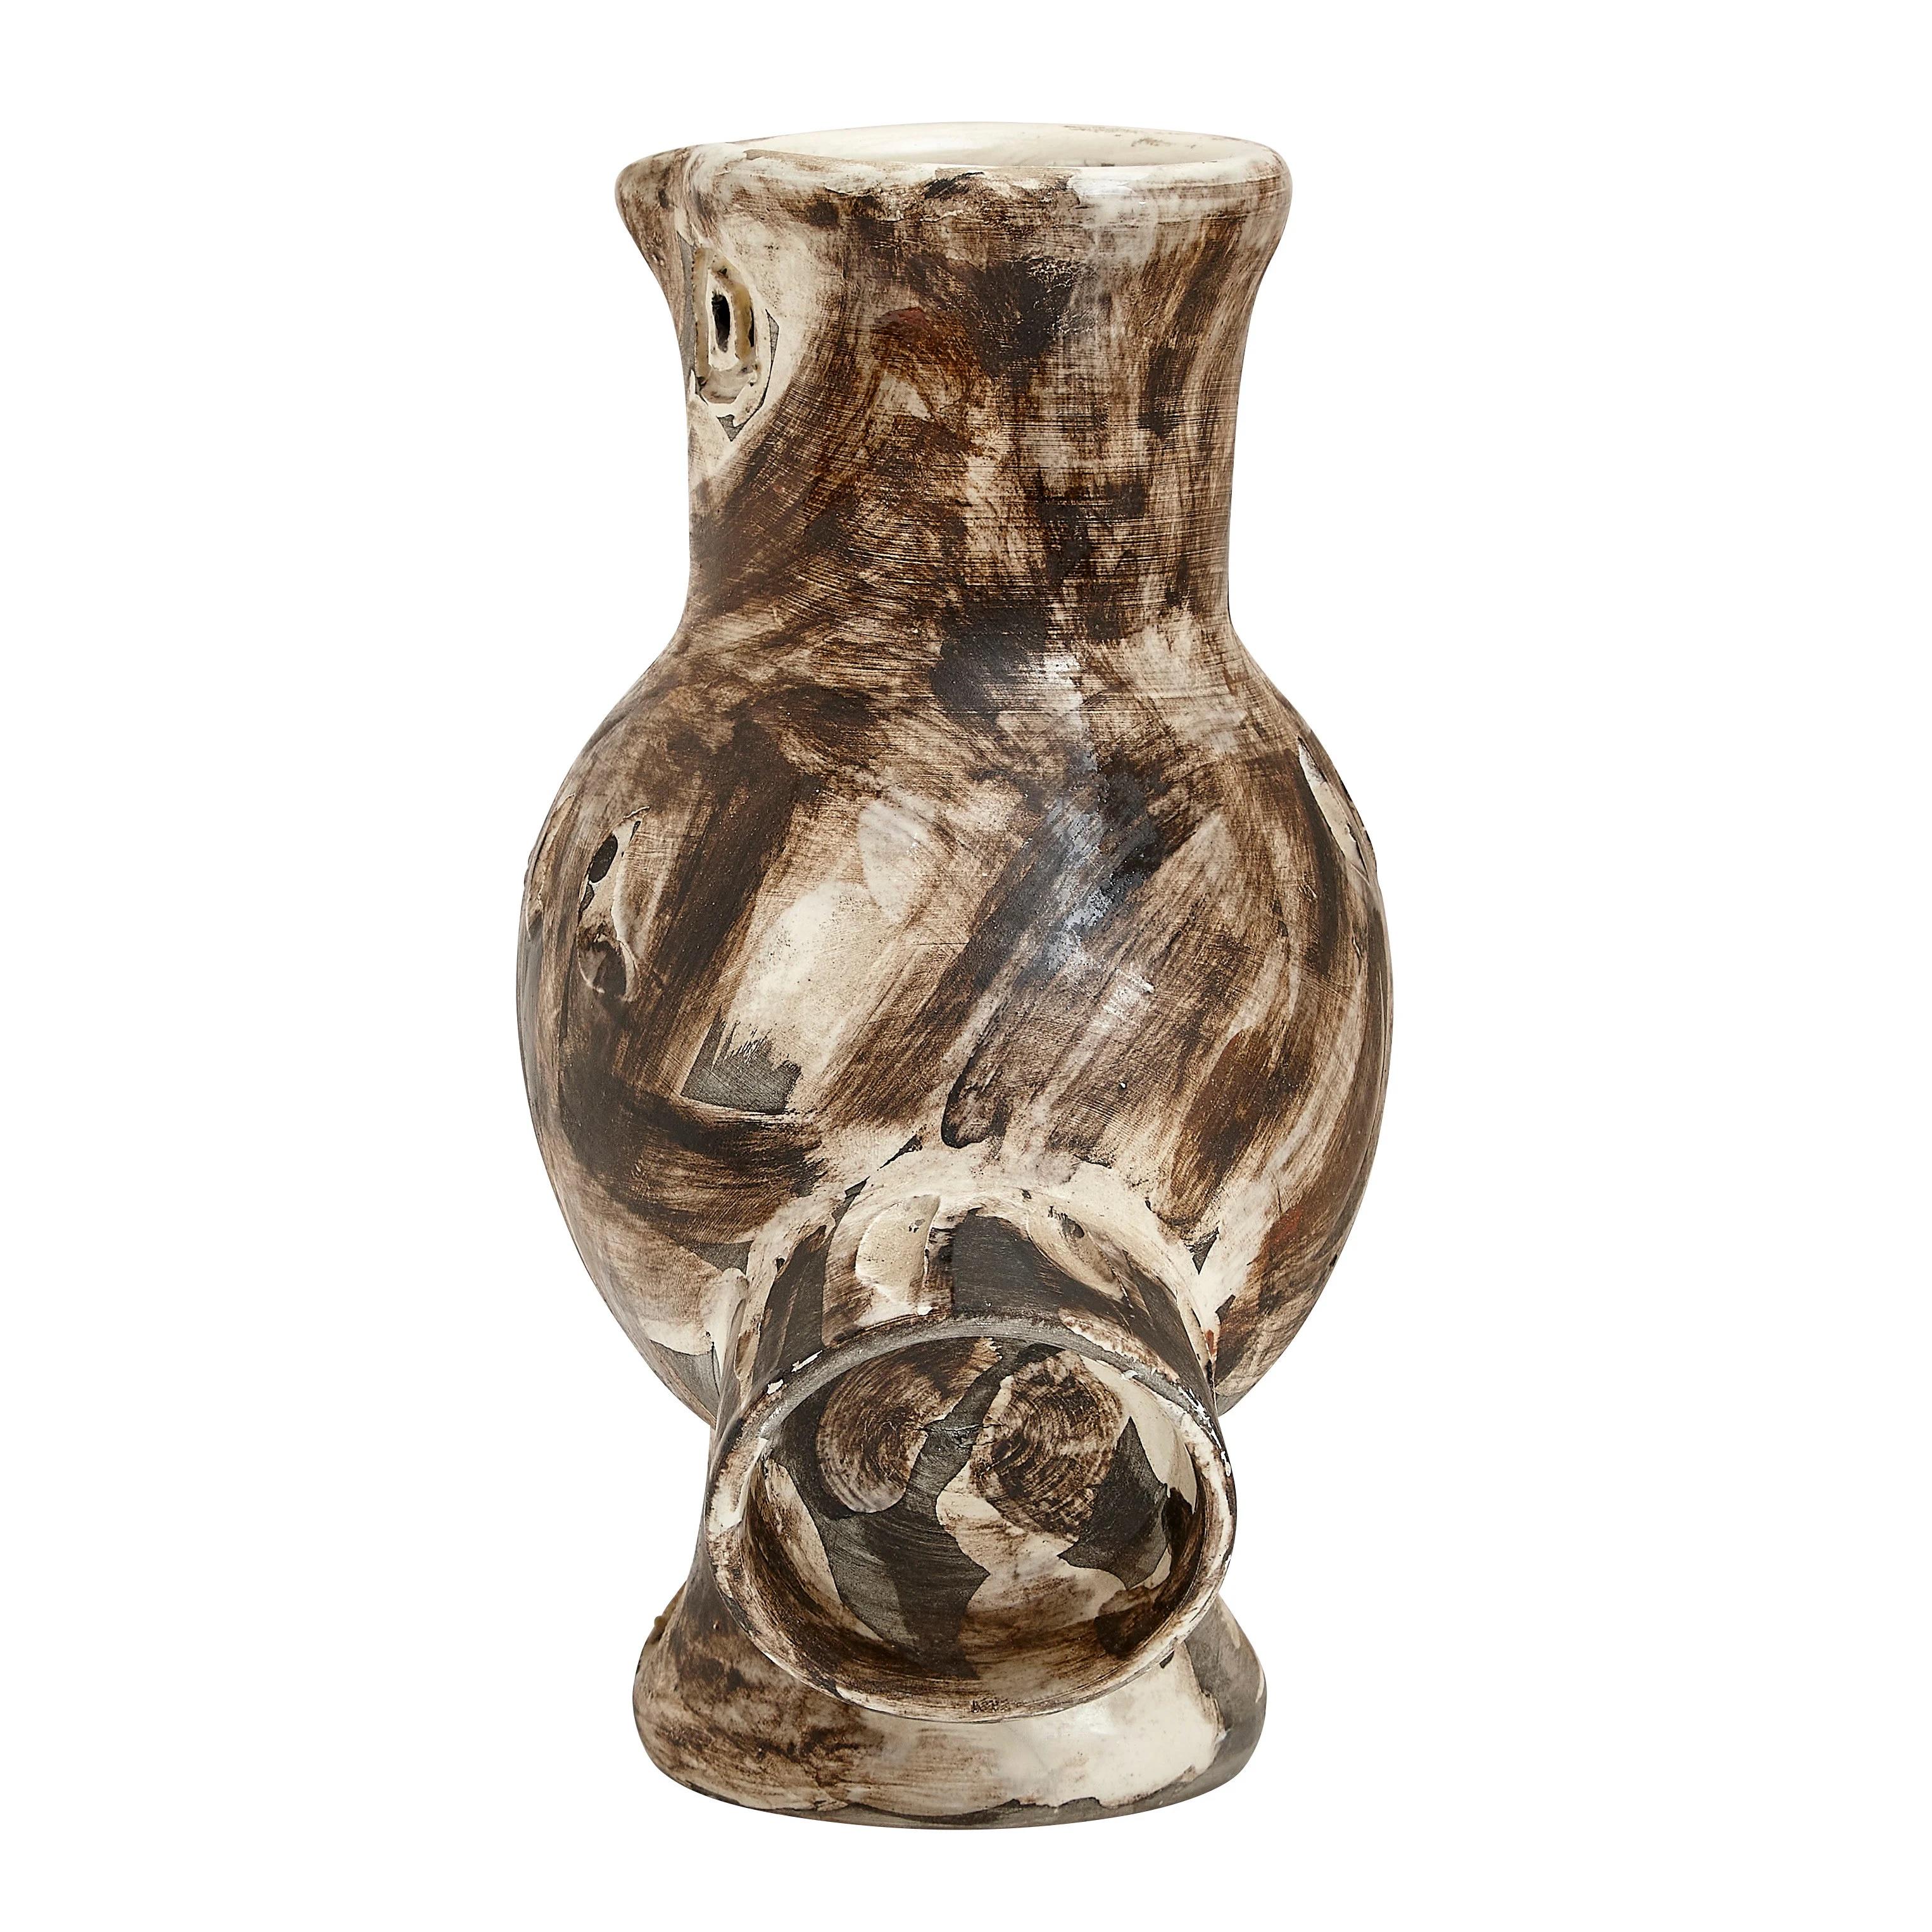 Pablo Picasso 'Chouette' (A. R. 604) Owl Madoura Vase 1969 For Sale 3